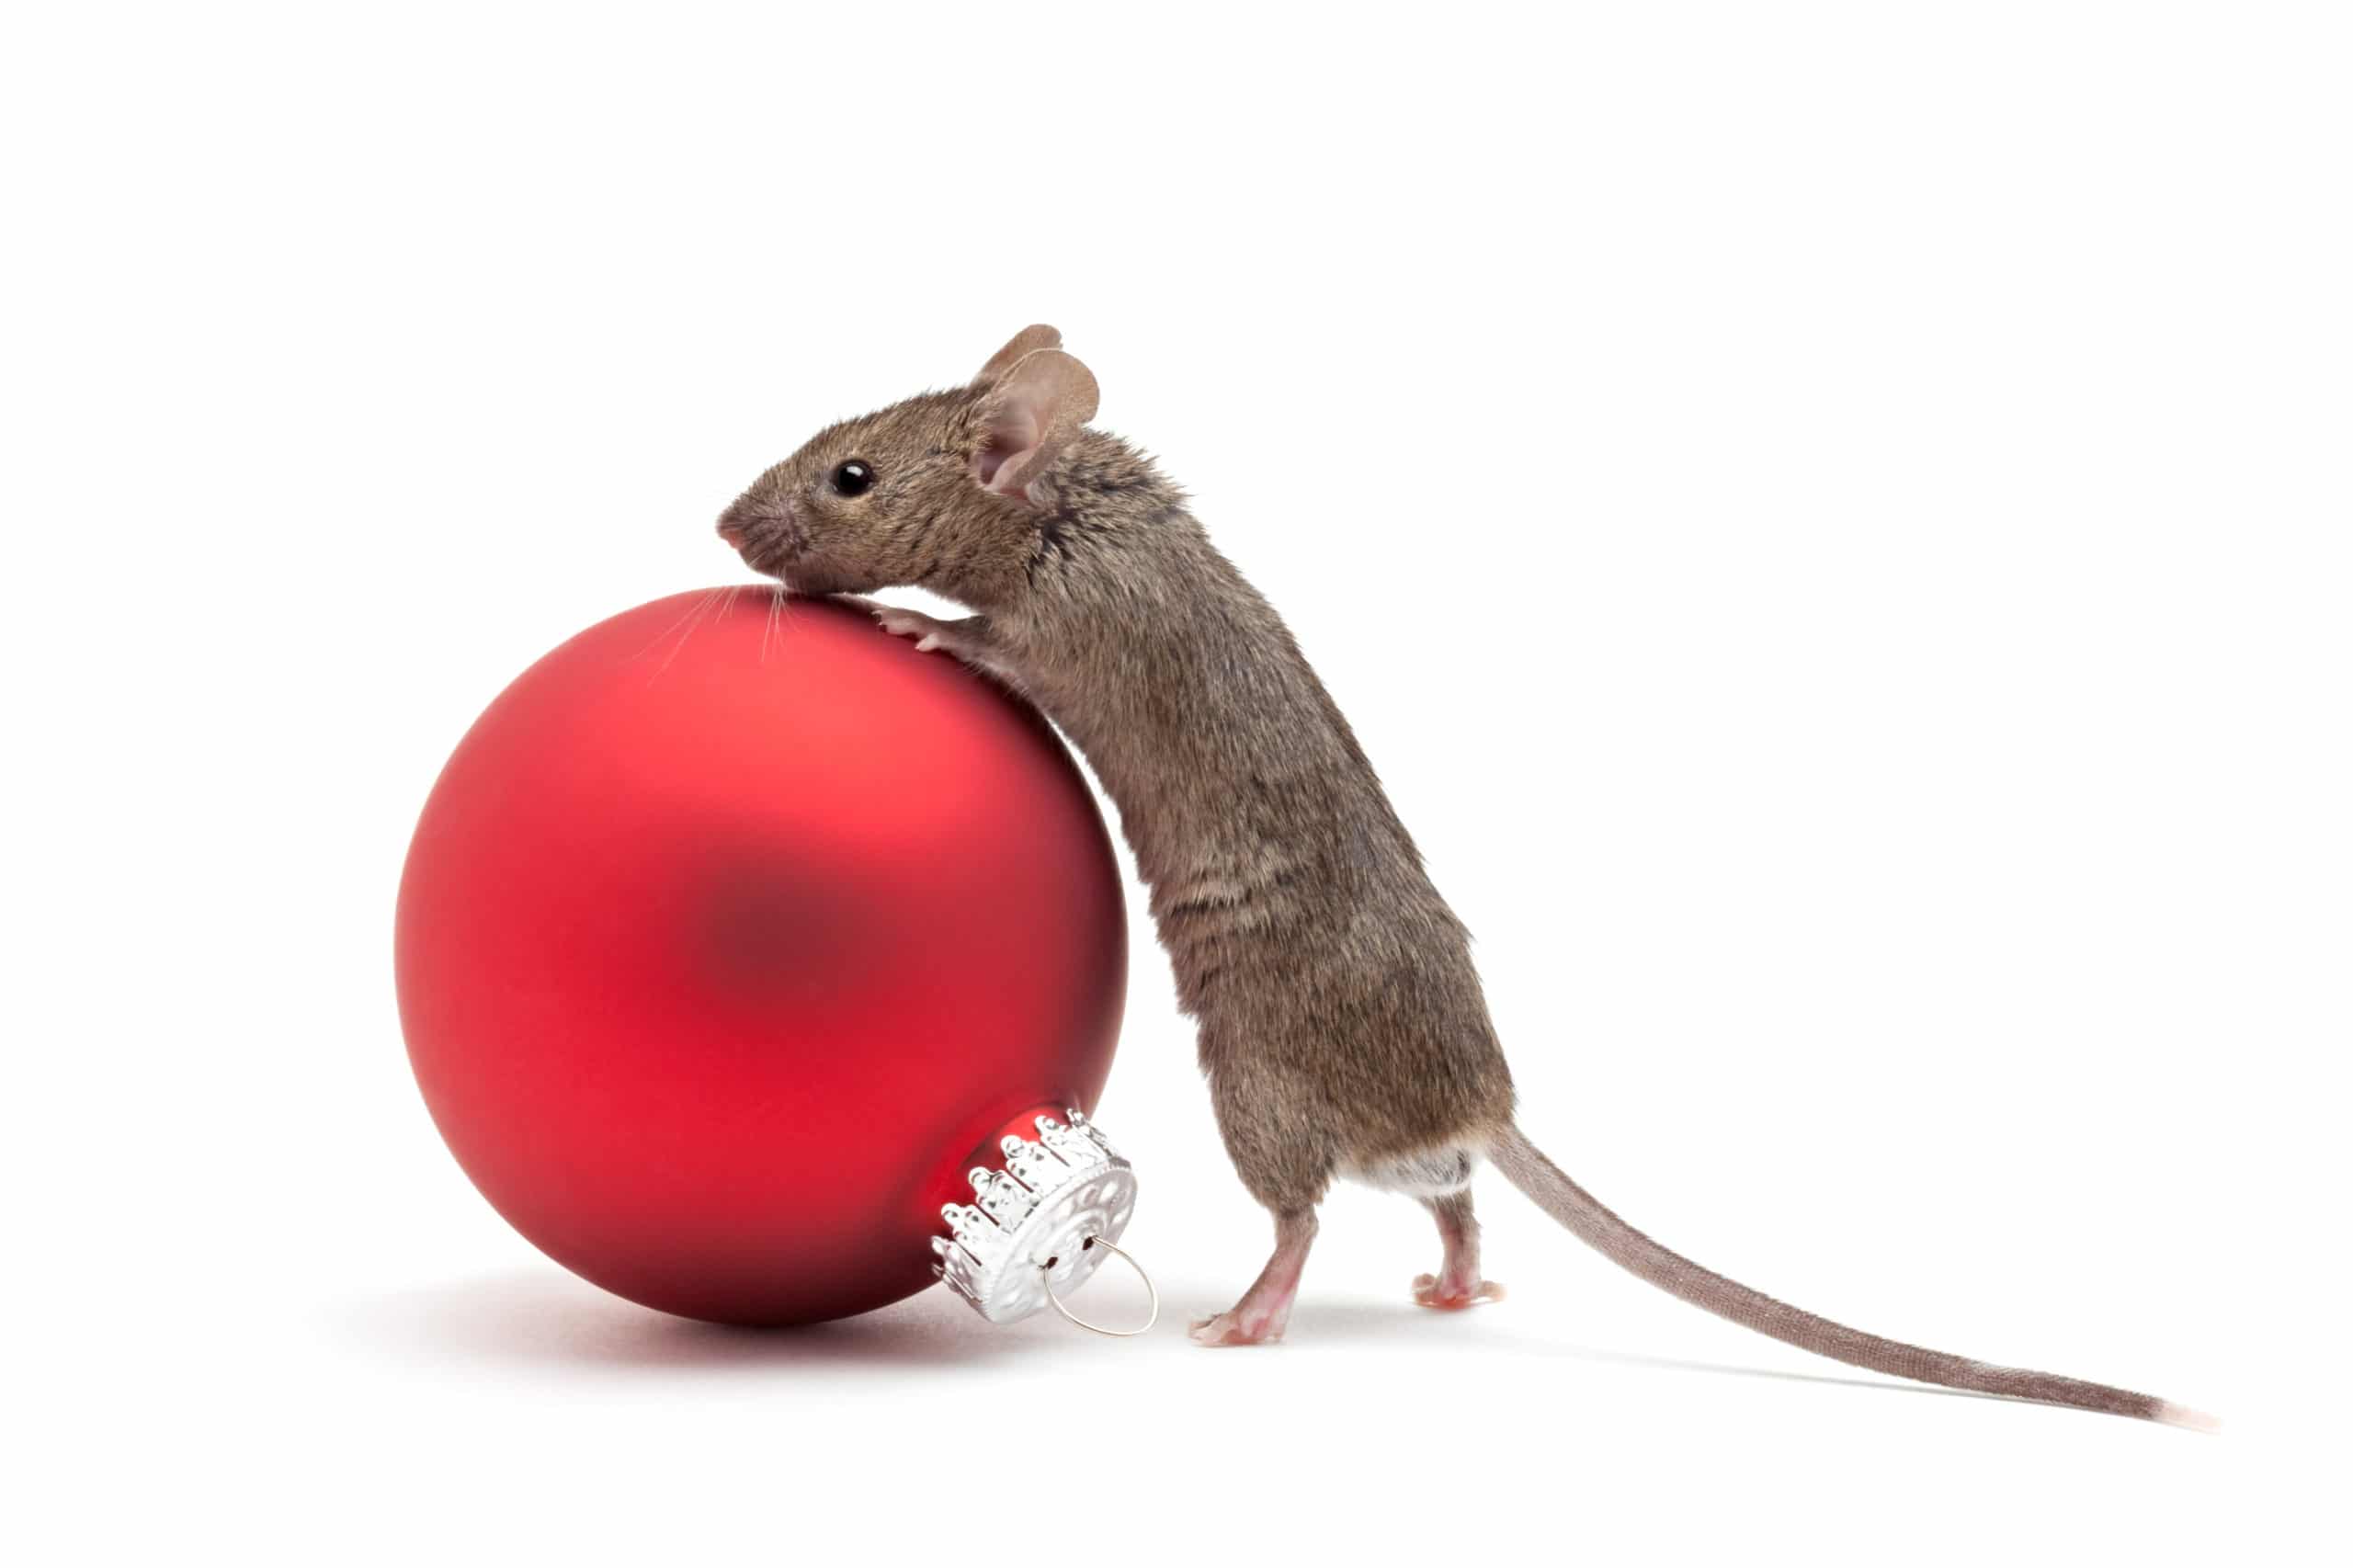 Mouse looking over a red Christmas ornament